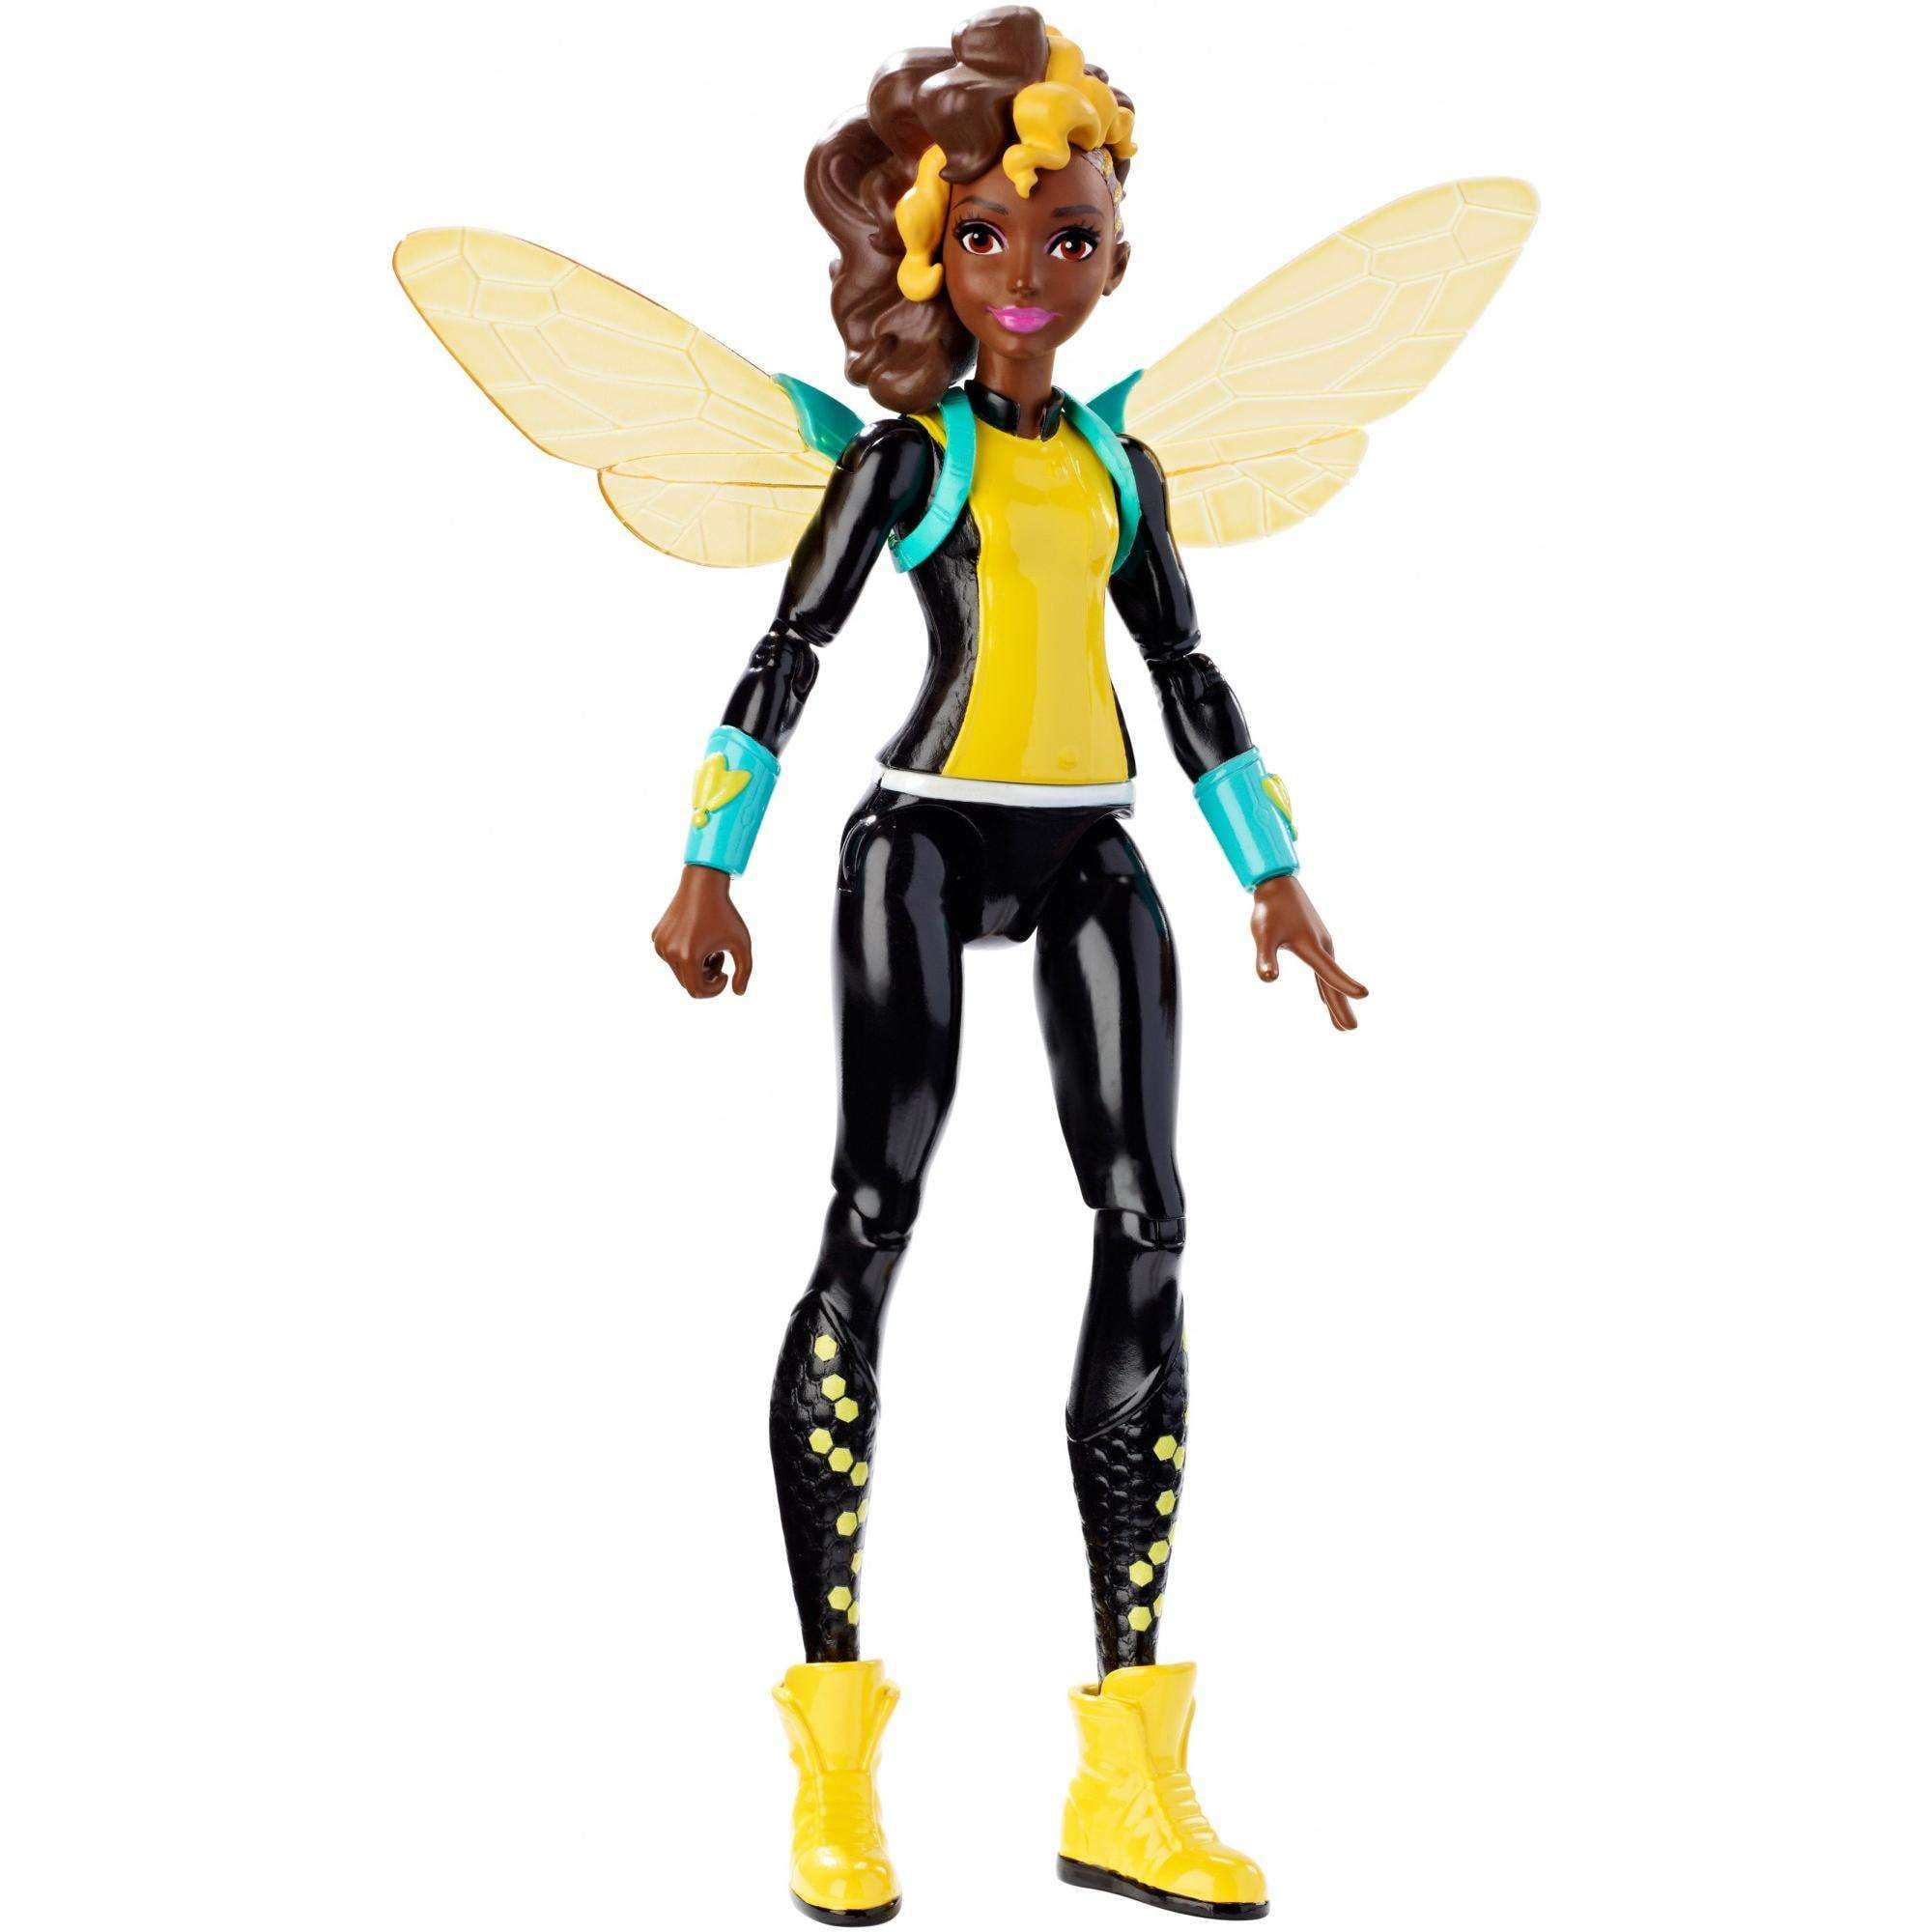 Details about   DC Super Hero Girls Bumblebee with Wings 6" Inch Action Figure Mattel 2015 